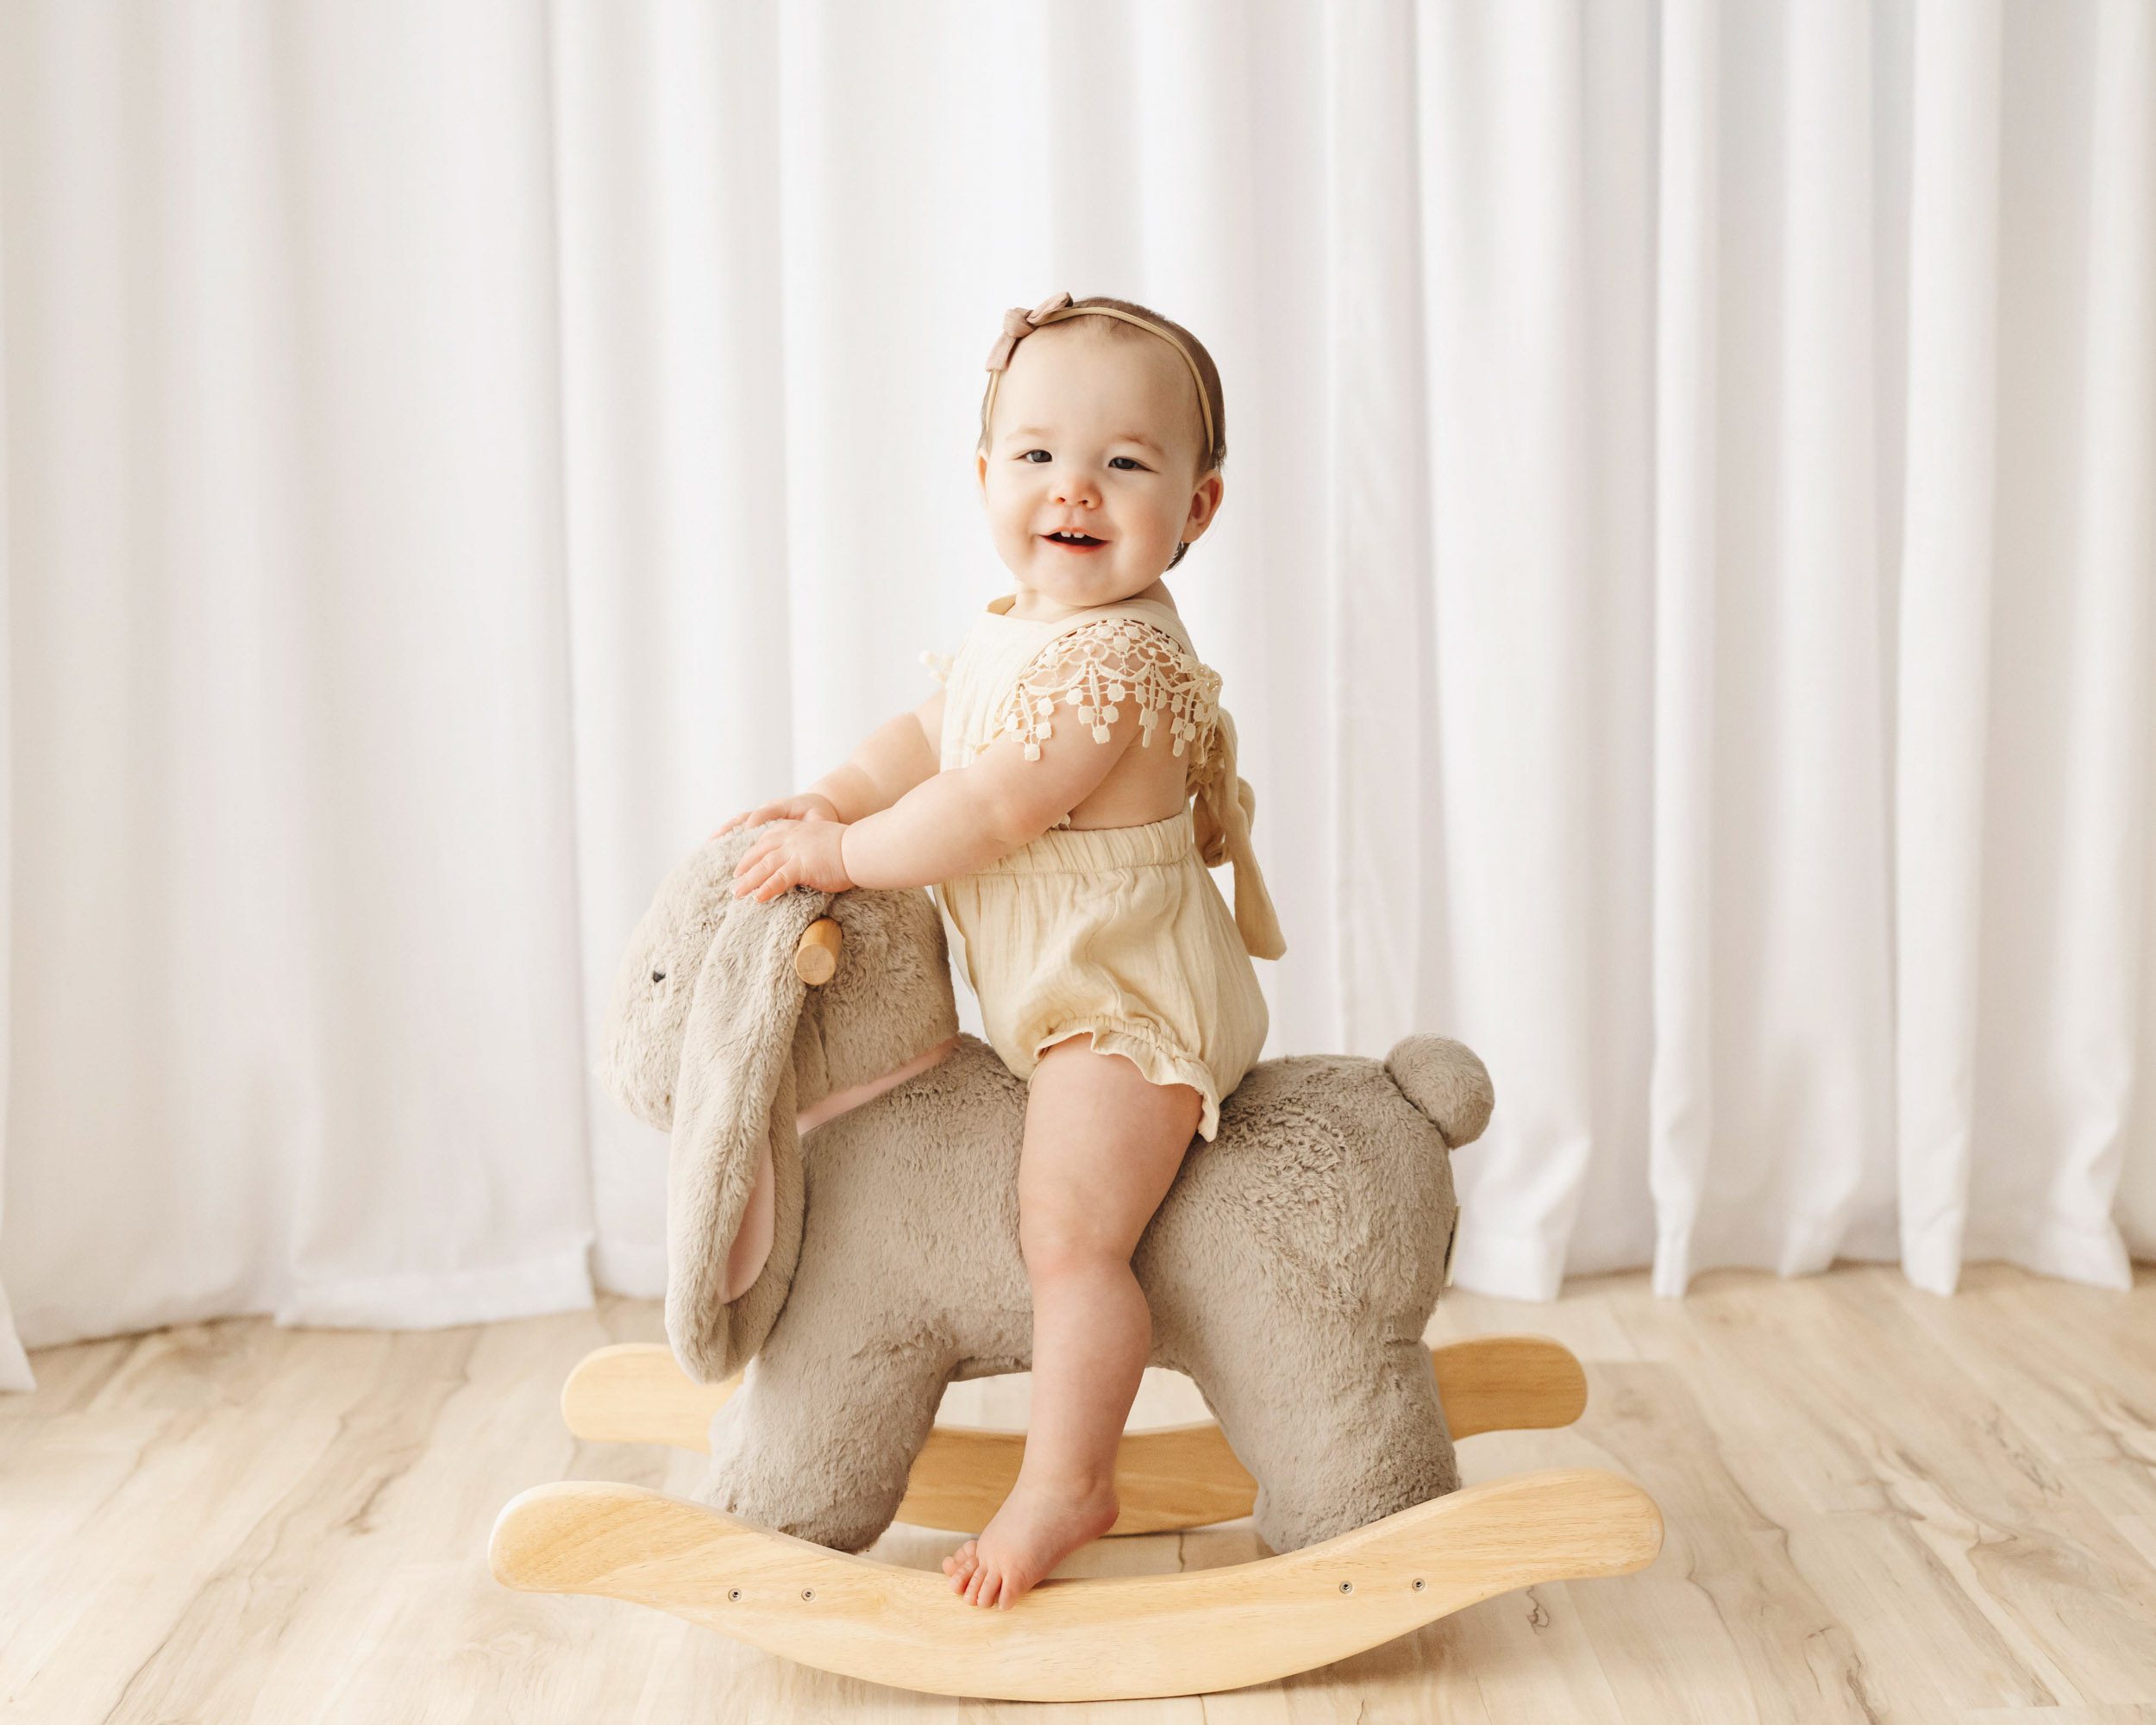 a young girl riding on a bunny rocker toy as she looks directly at the camera with a huge smile on her face during a 1st birthday photoshoot